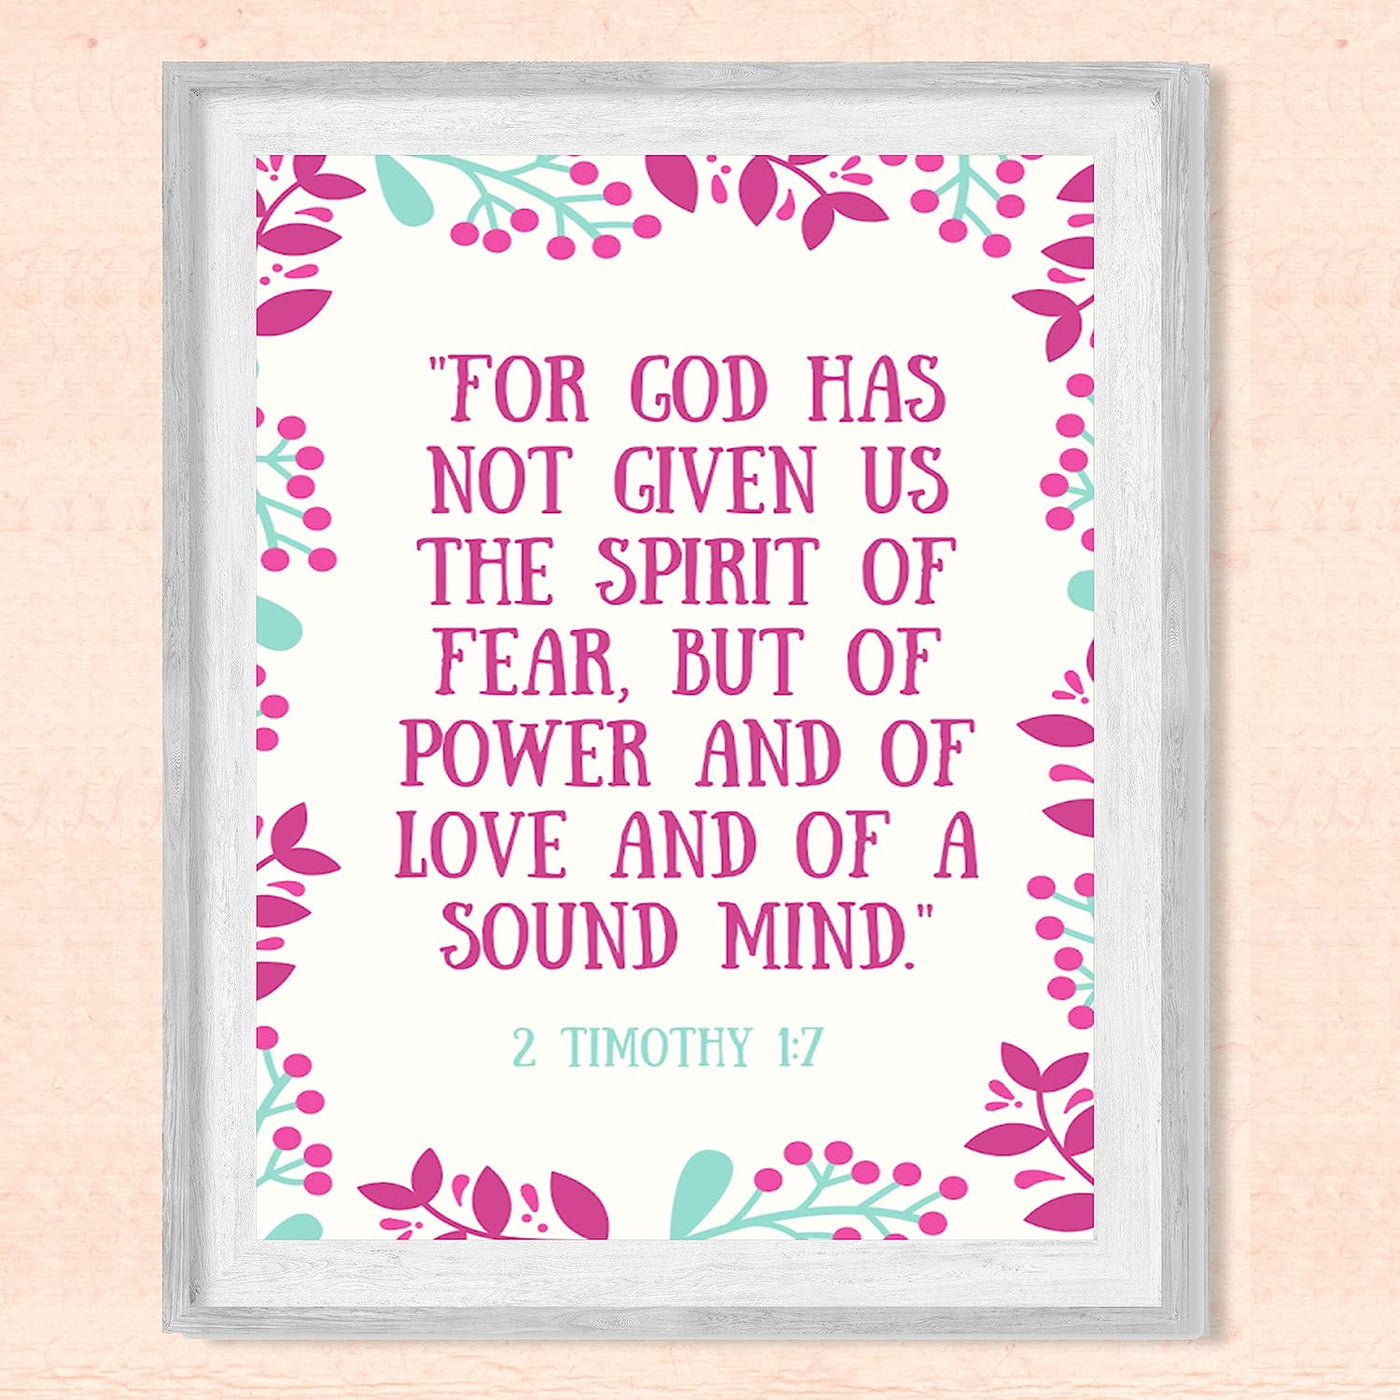 For God Has Not Given Us the Spirit of Fear?-2 Timothy 1:7-Bible Verse Wall Art-8 x 10 Abstract Floral Scripture Print-Ready to Frame. Inspirational Home-Office-Church Decor. Great Christian Gift!